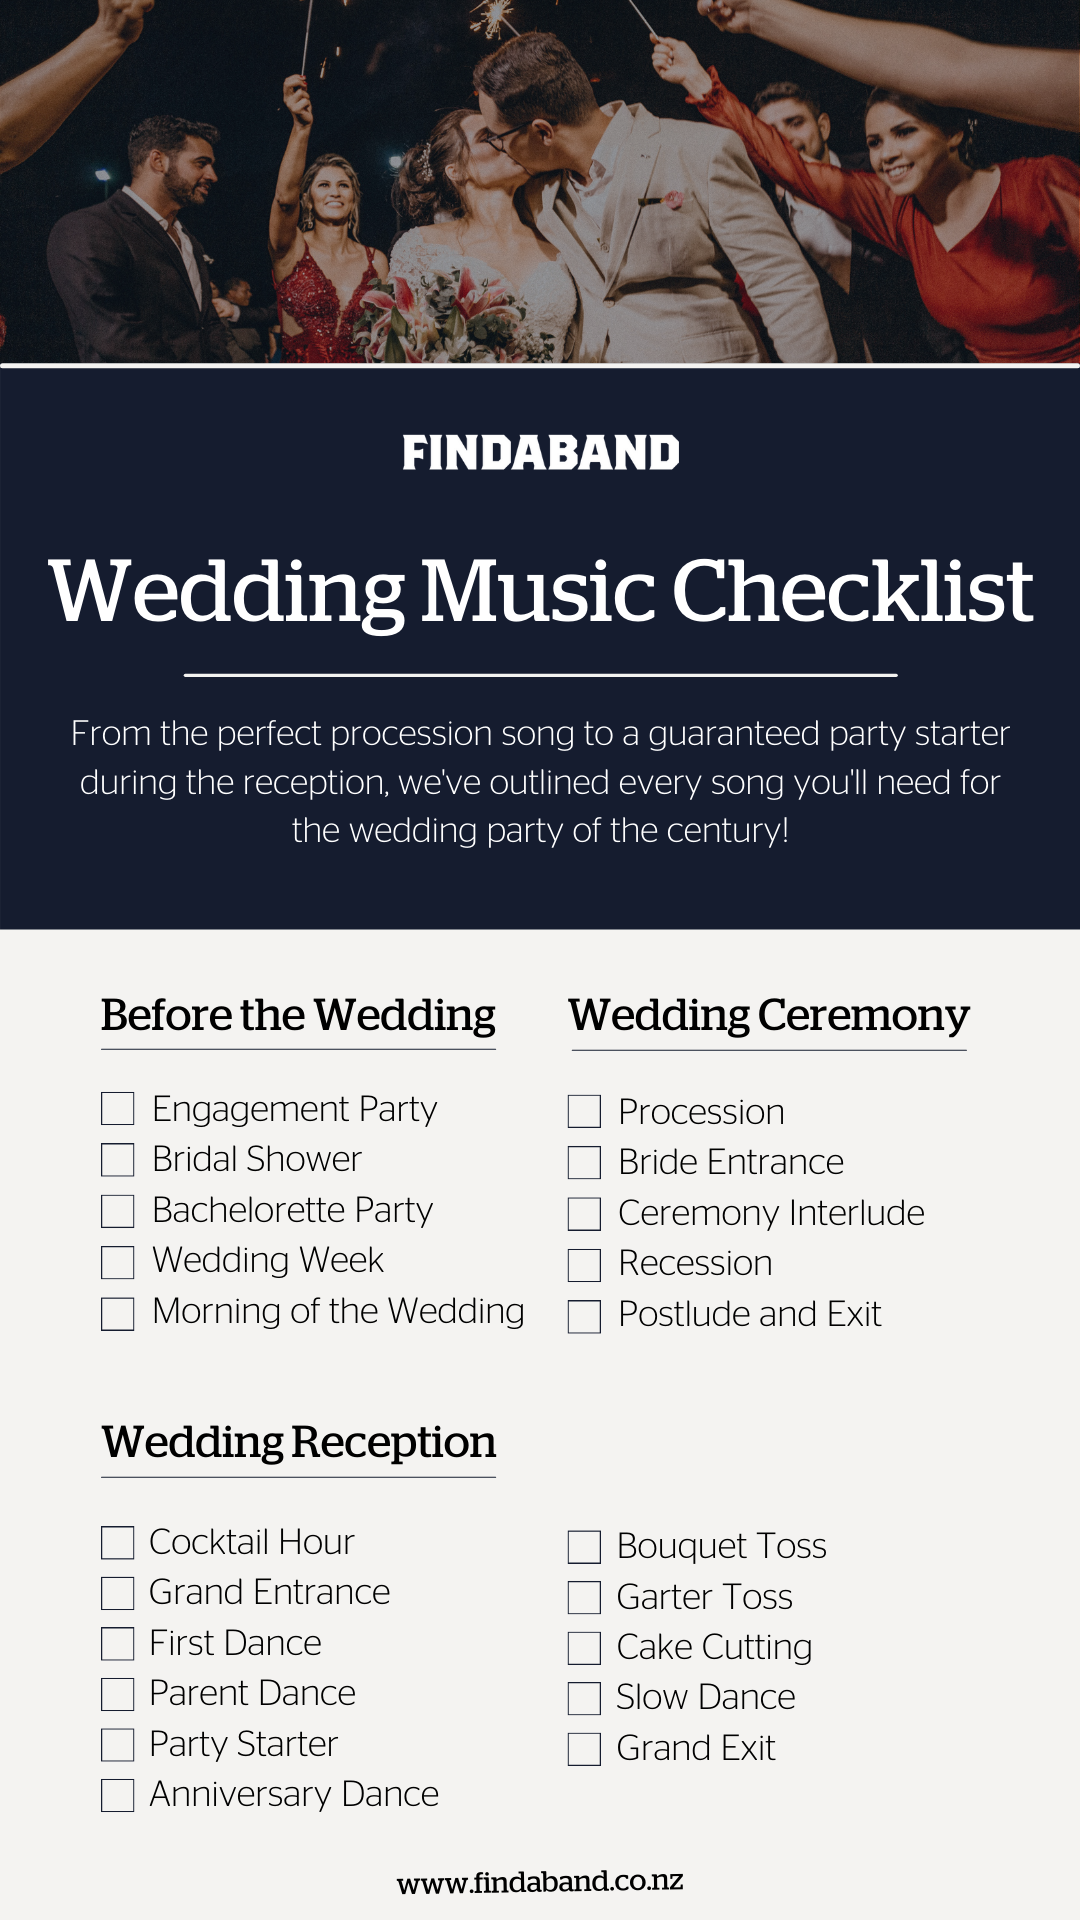 Wedding Music Checklist: The Ultimate Guide for 2021